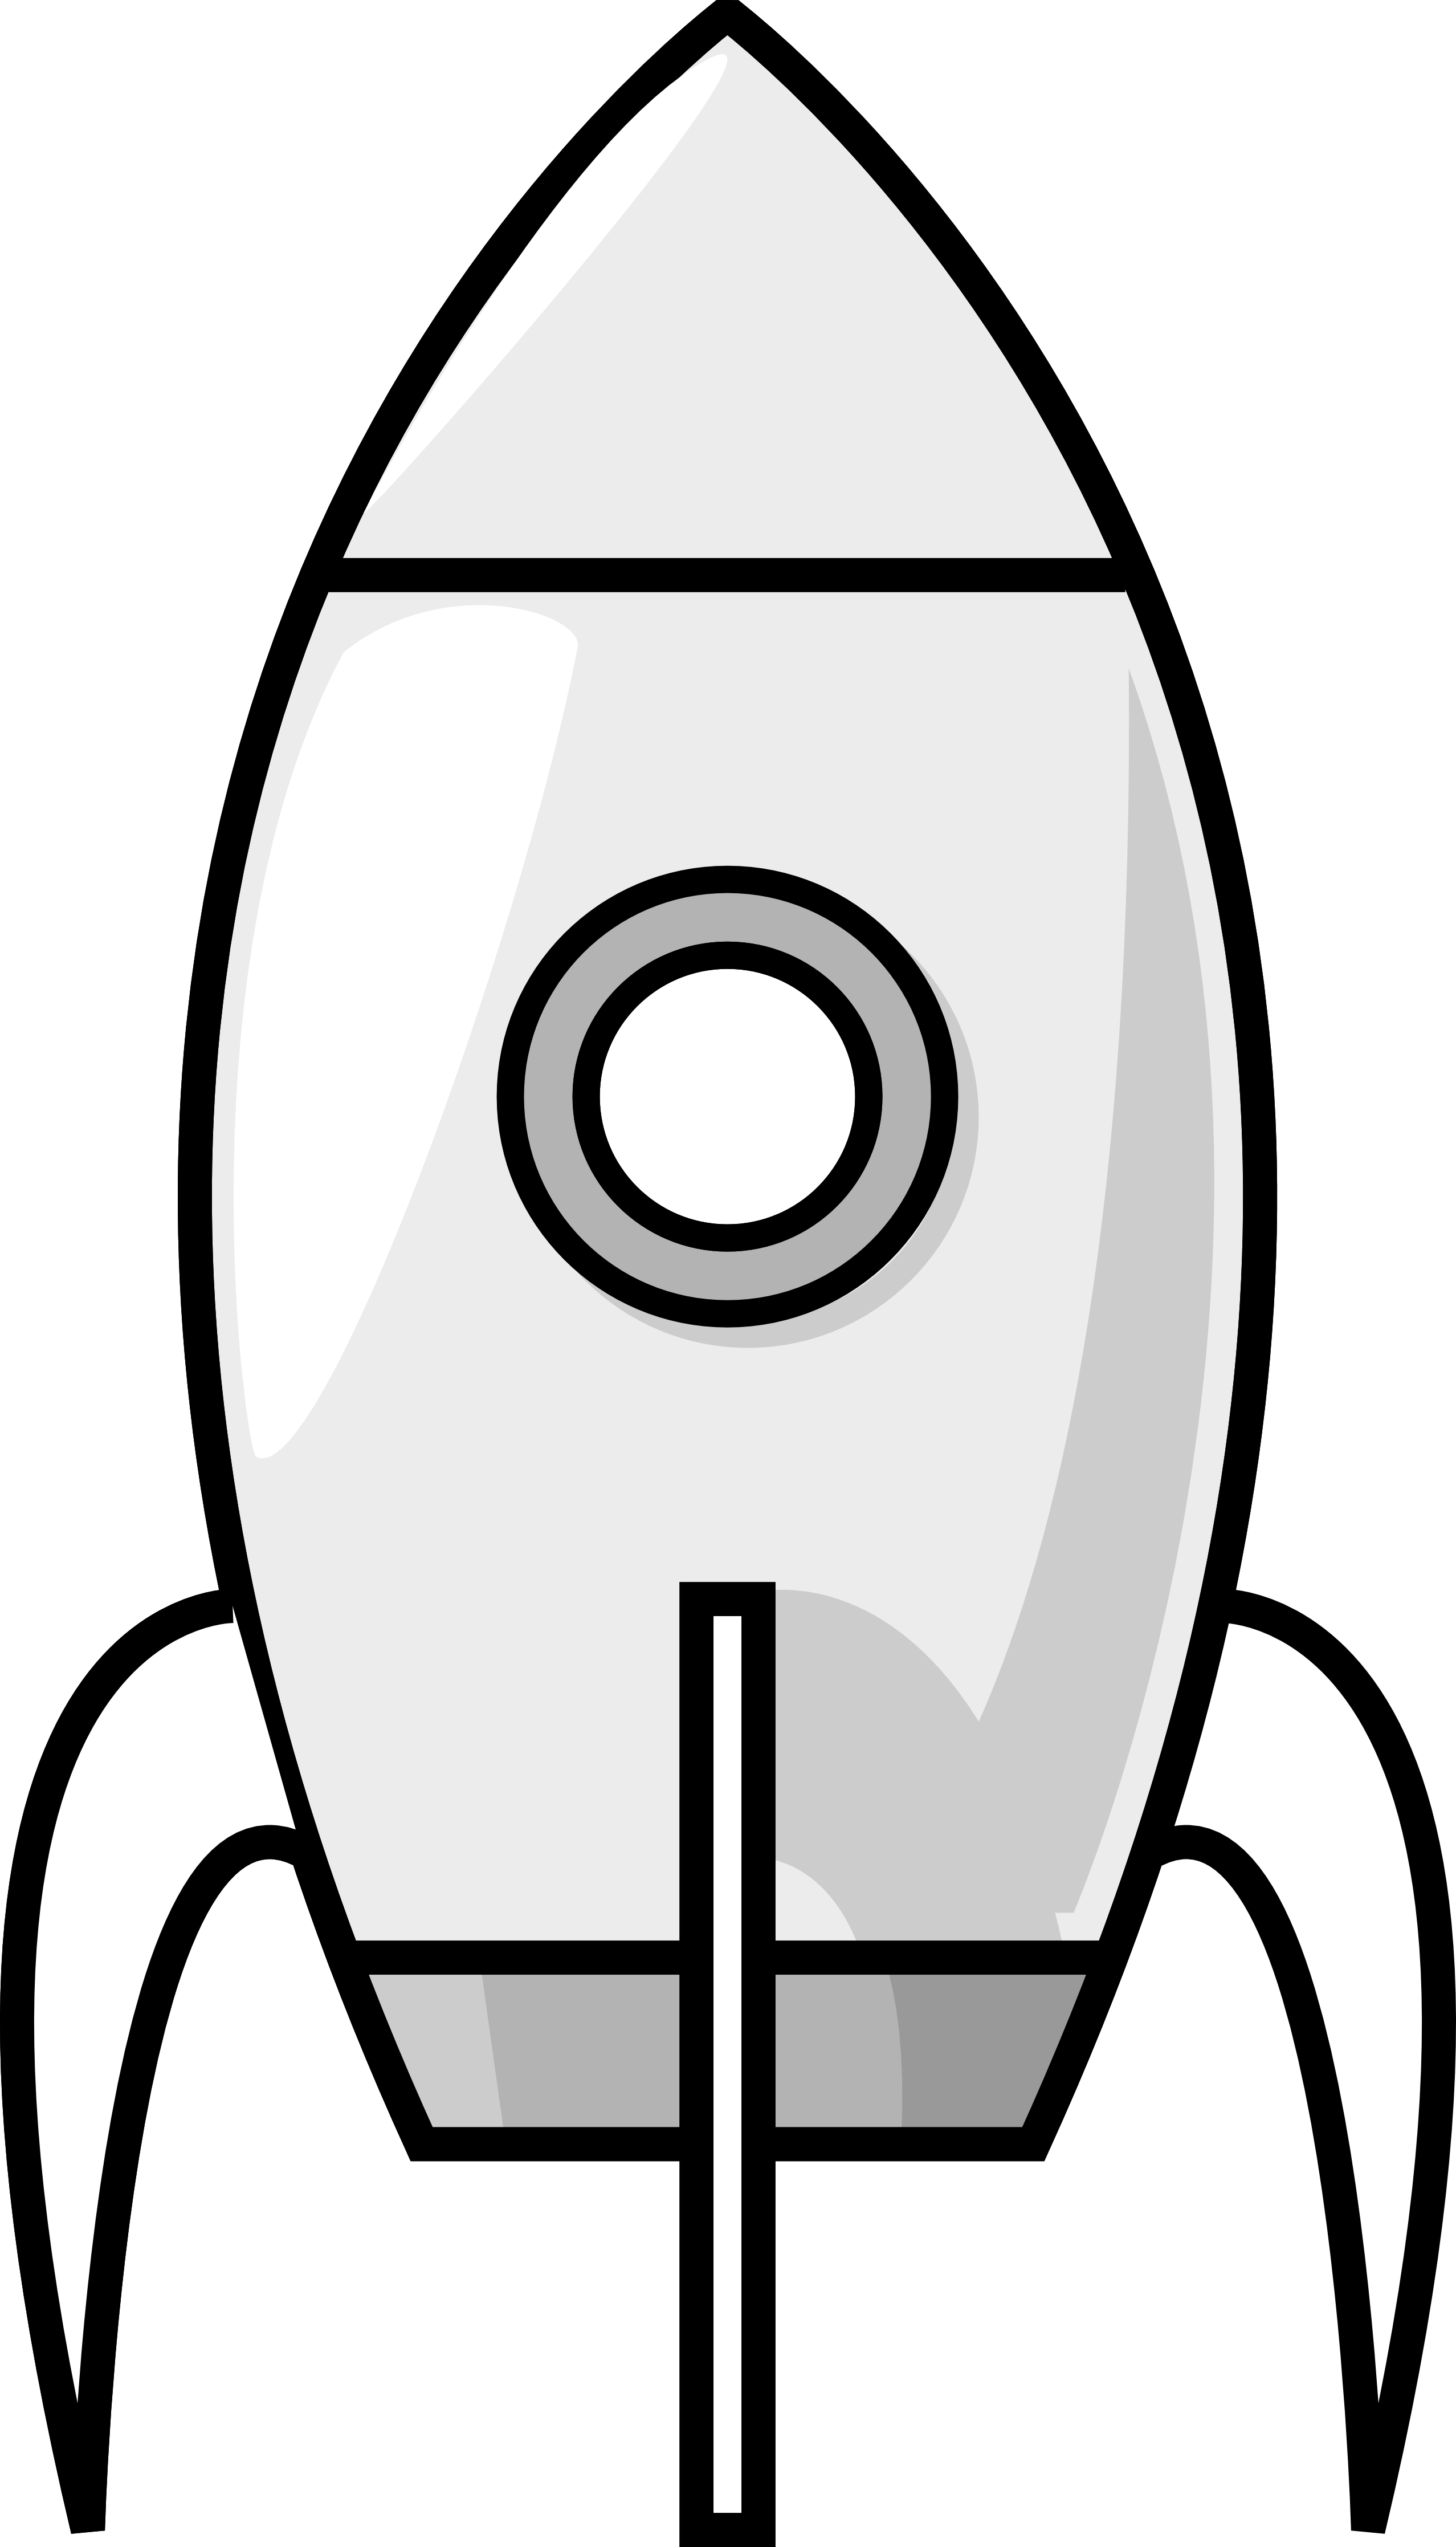 Rocket black and white clipart